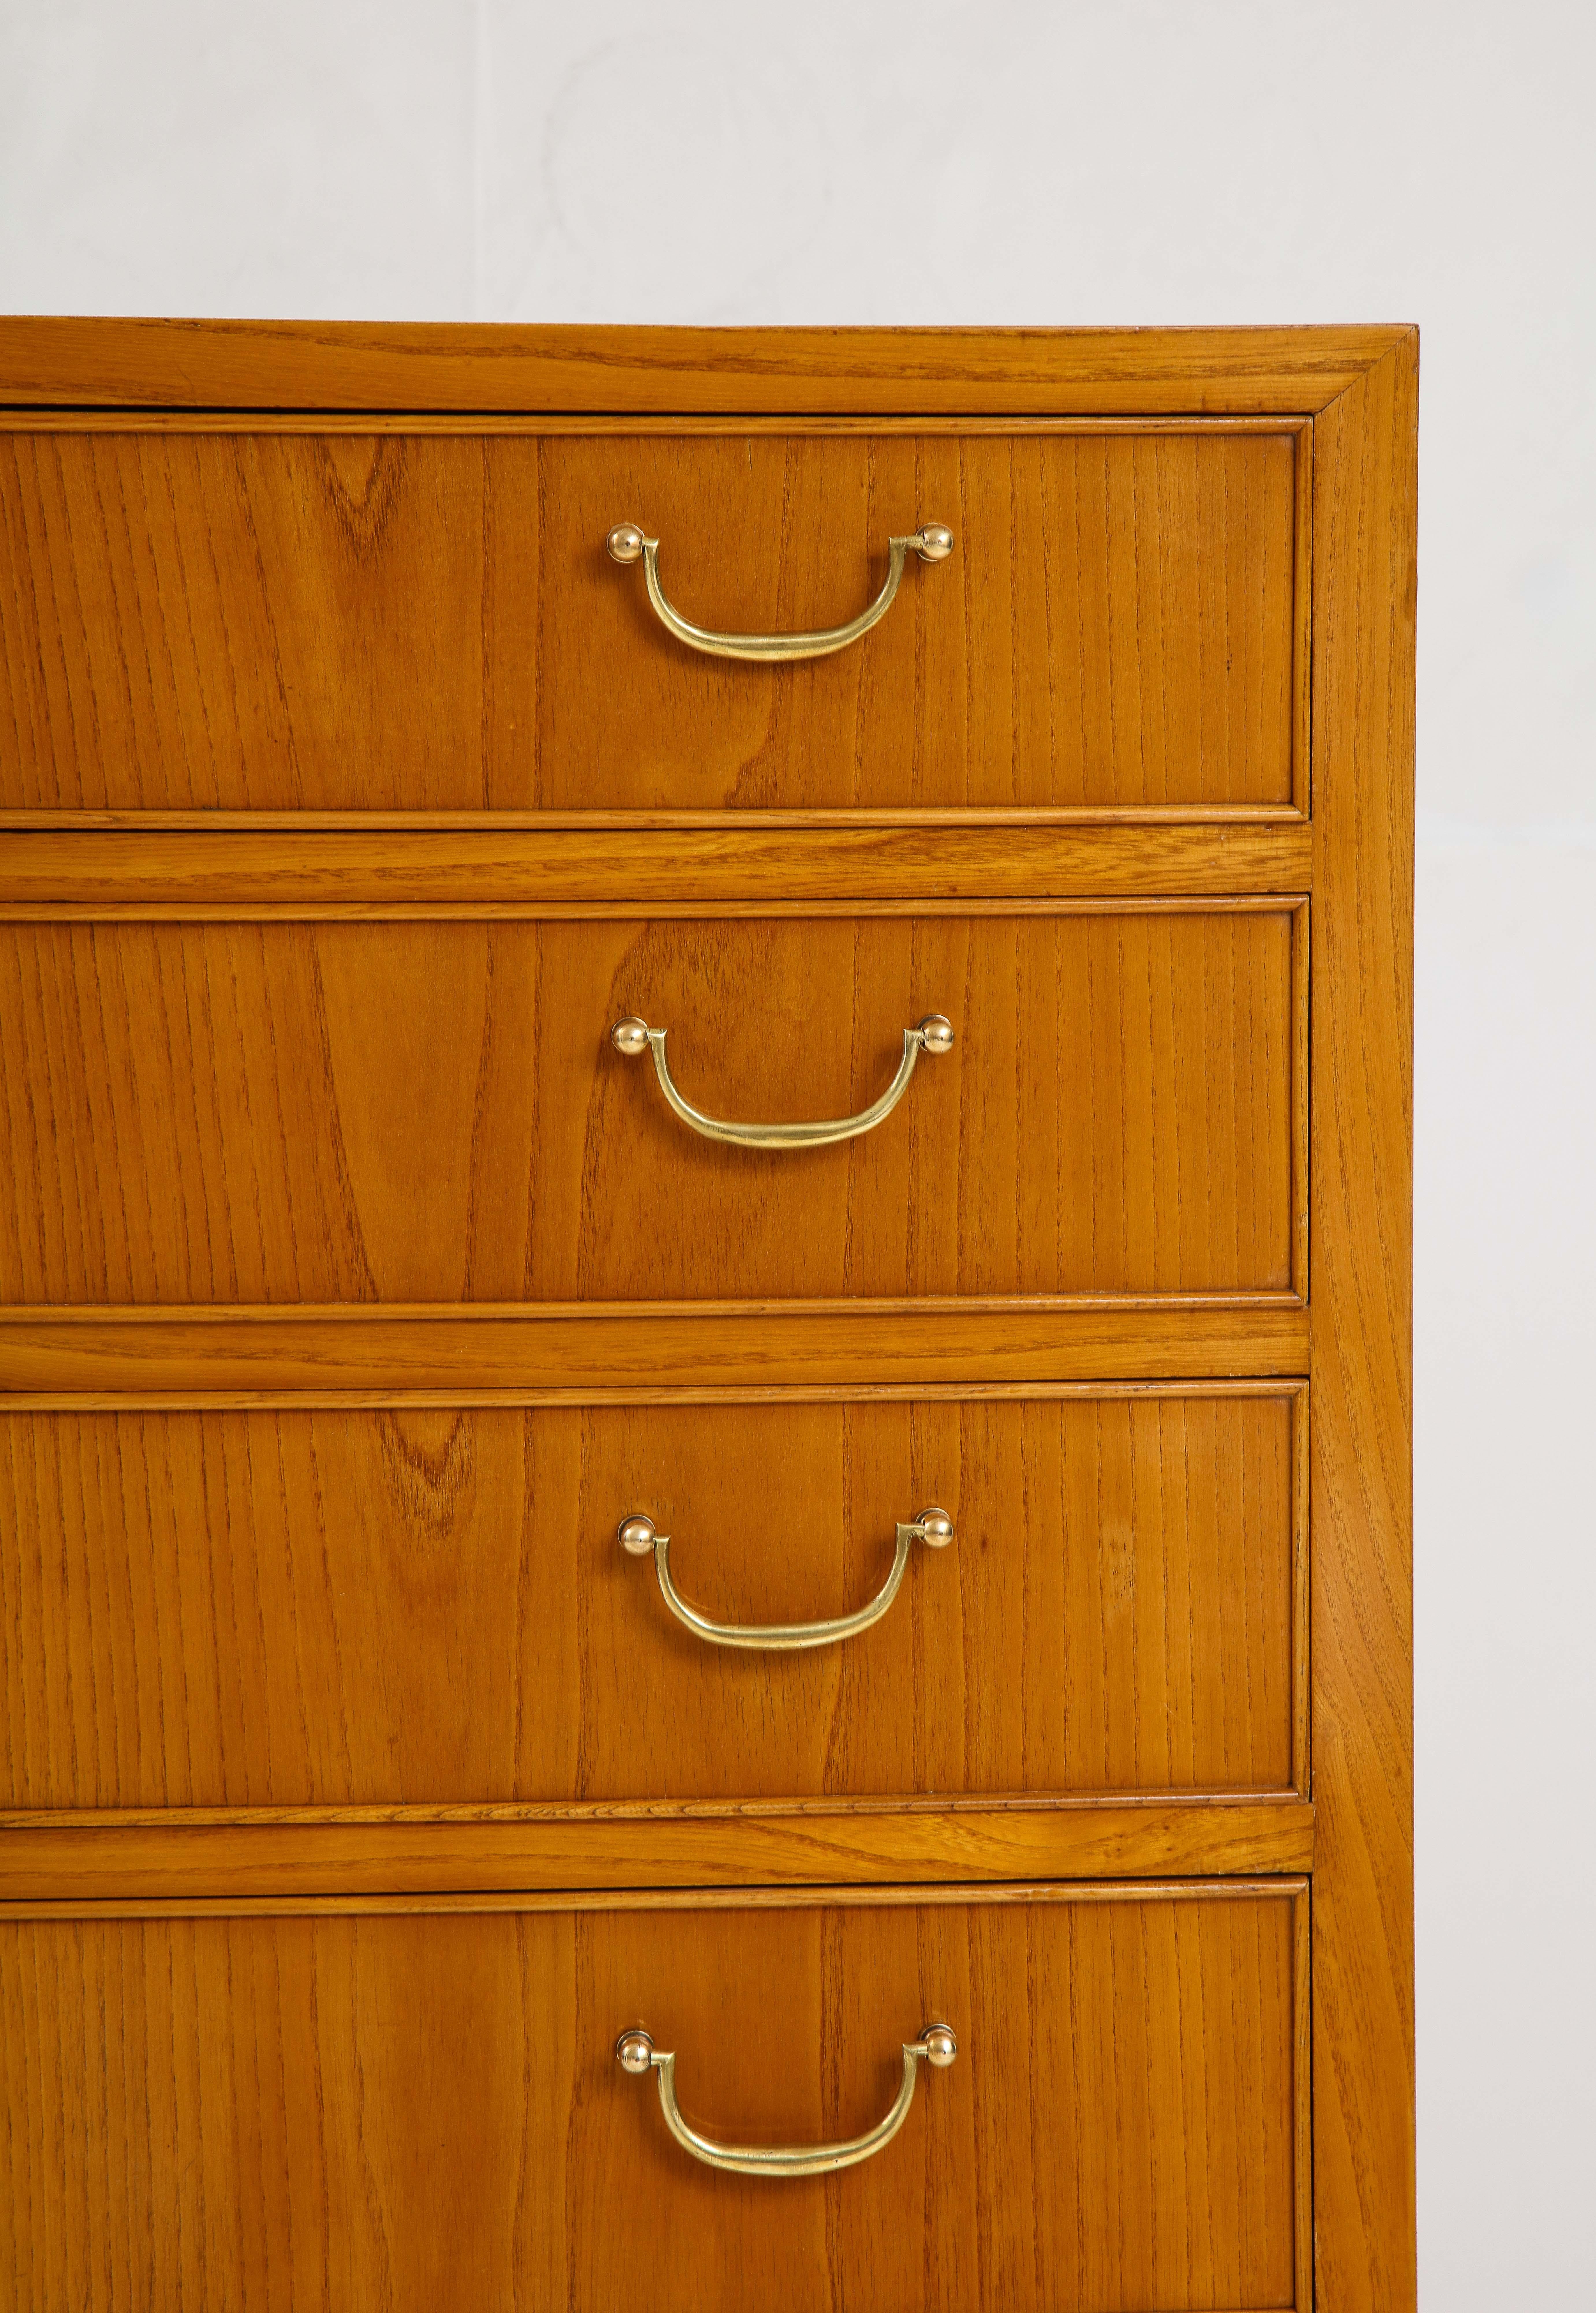 Danish Ole Wanscher Elm Wood Tall Bow Front Chest of Drawers, Circa 1950s For Sale